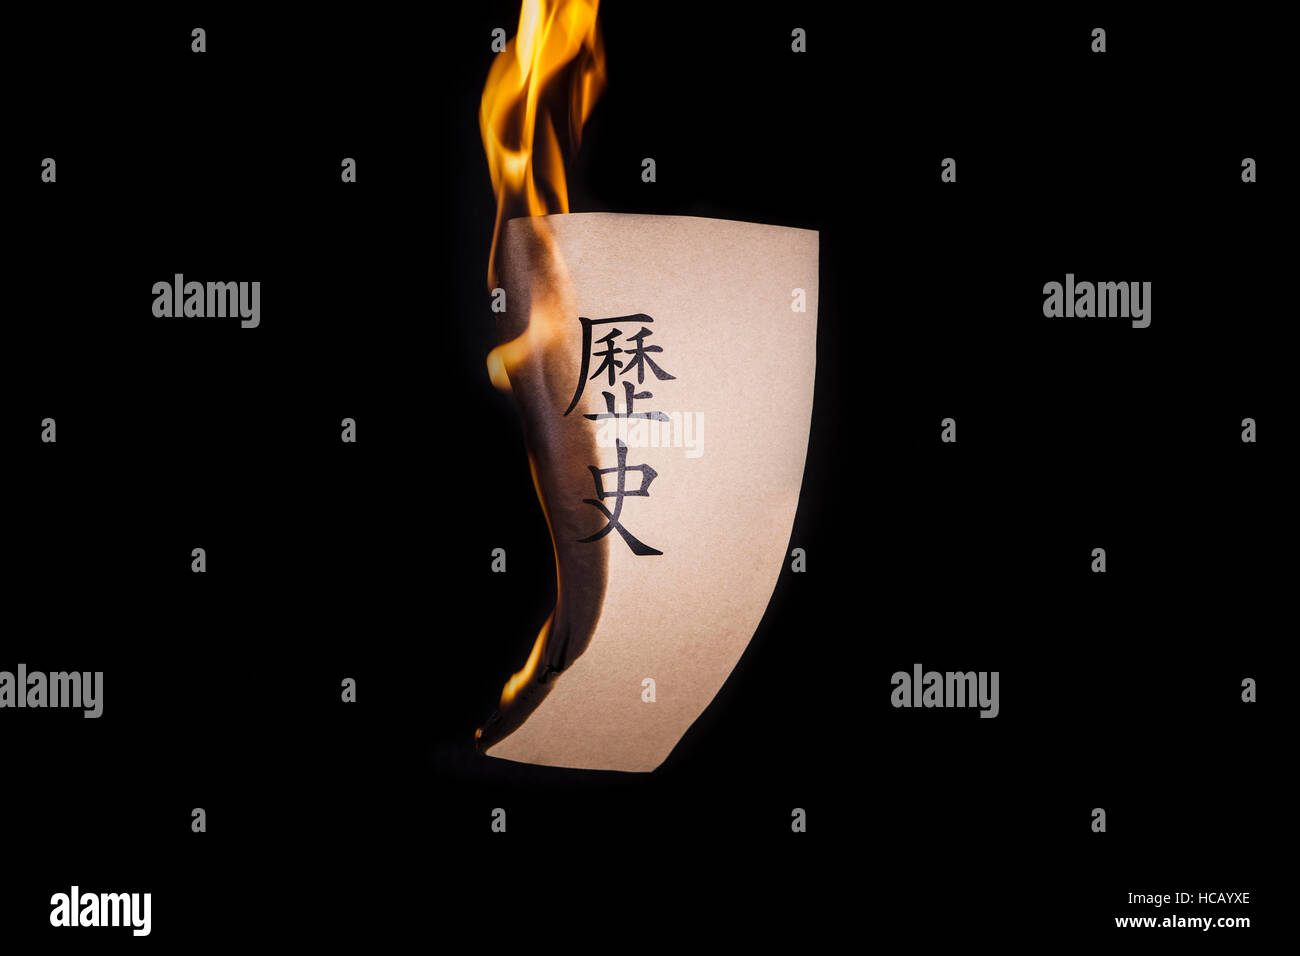 Chinese letters for History on a paper burning Stock Photo